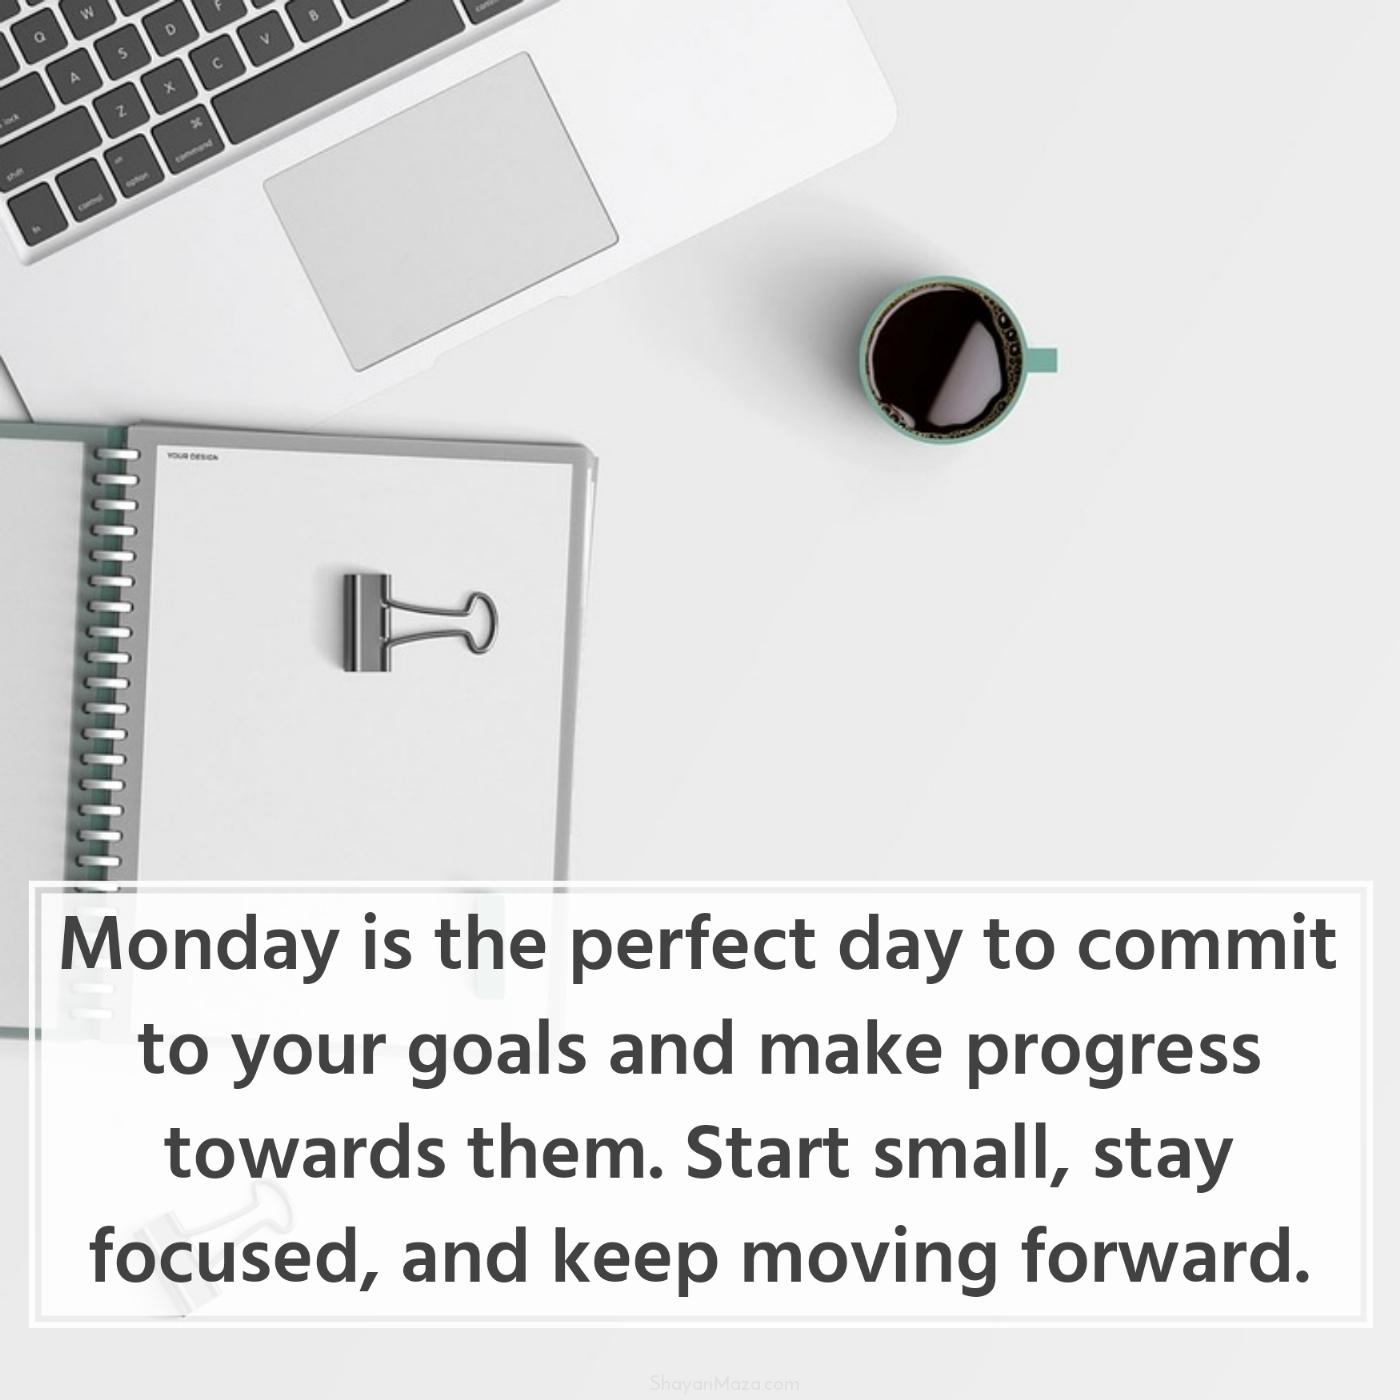 Monday is the perfect day to commit to your goals